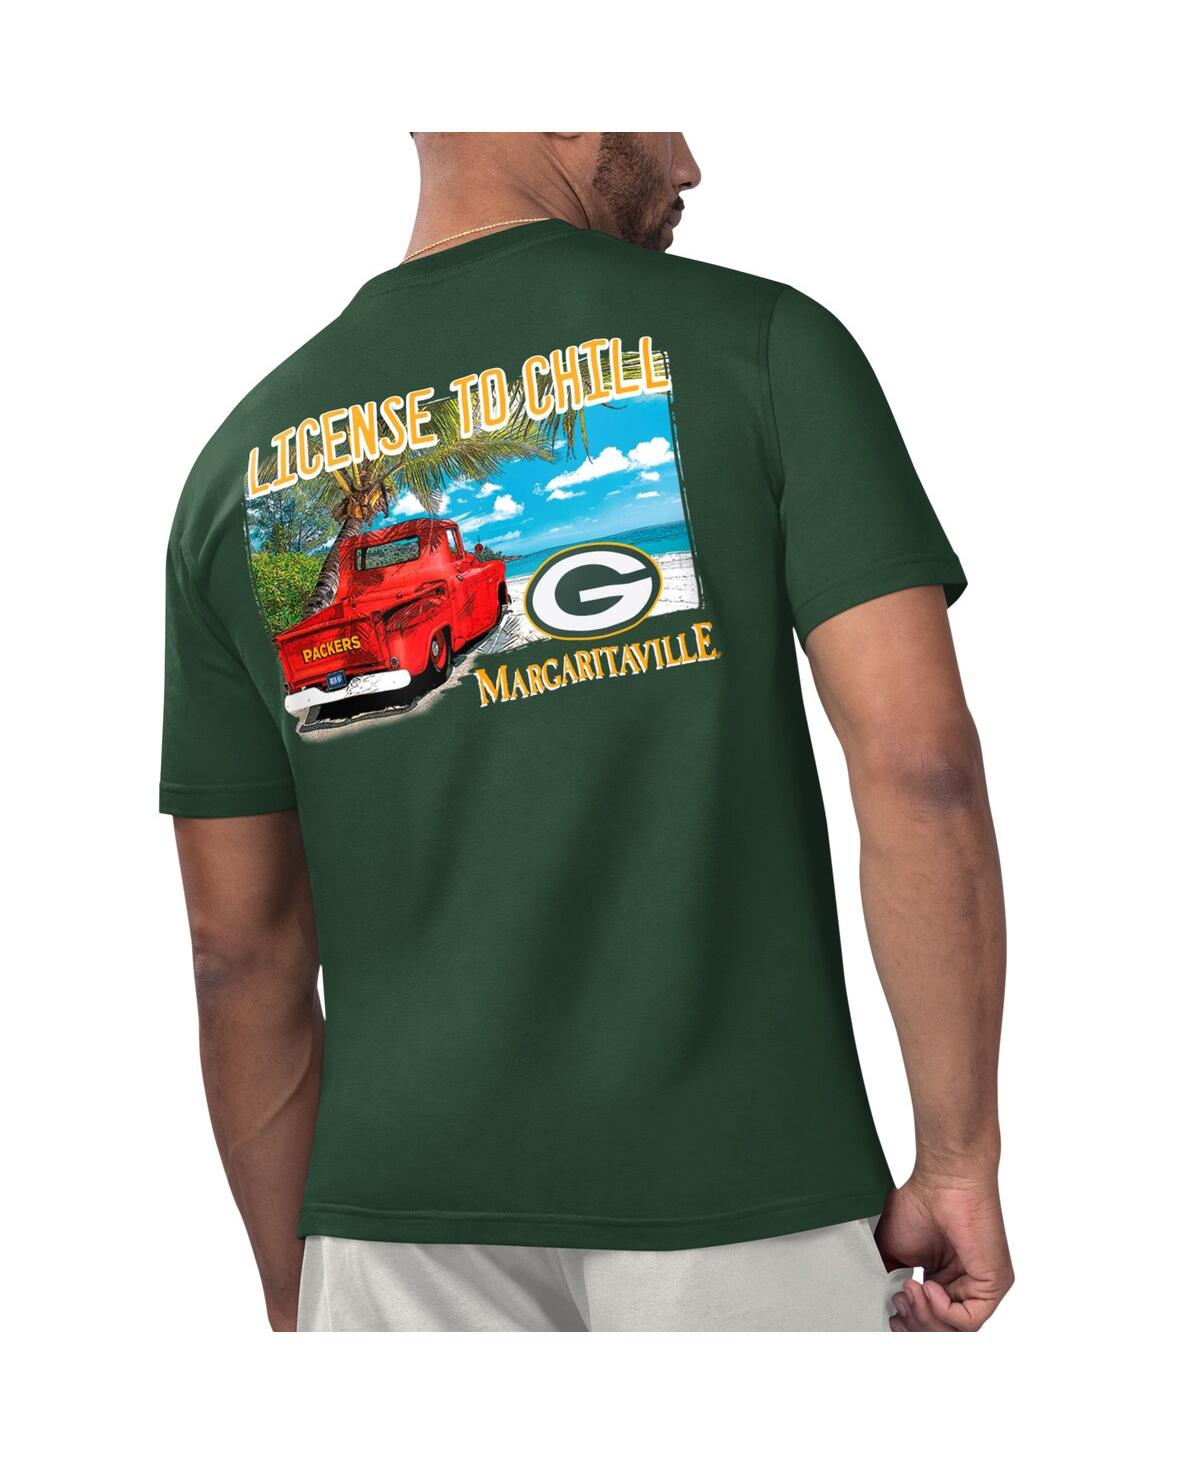 Shop Margaritaville Men's  Green Green Bay Packers Licensed To Chill T-shirt